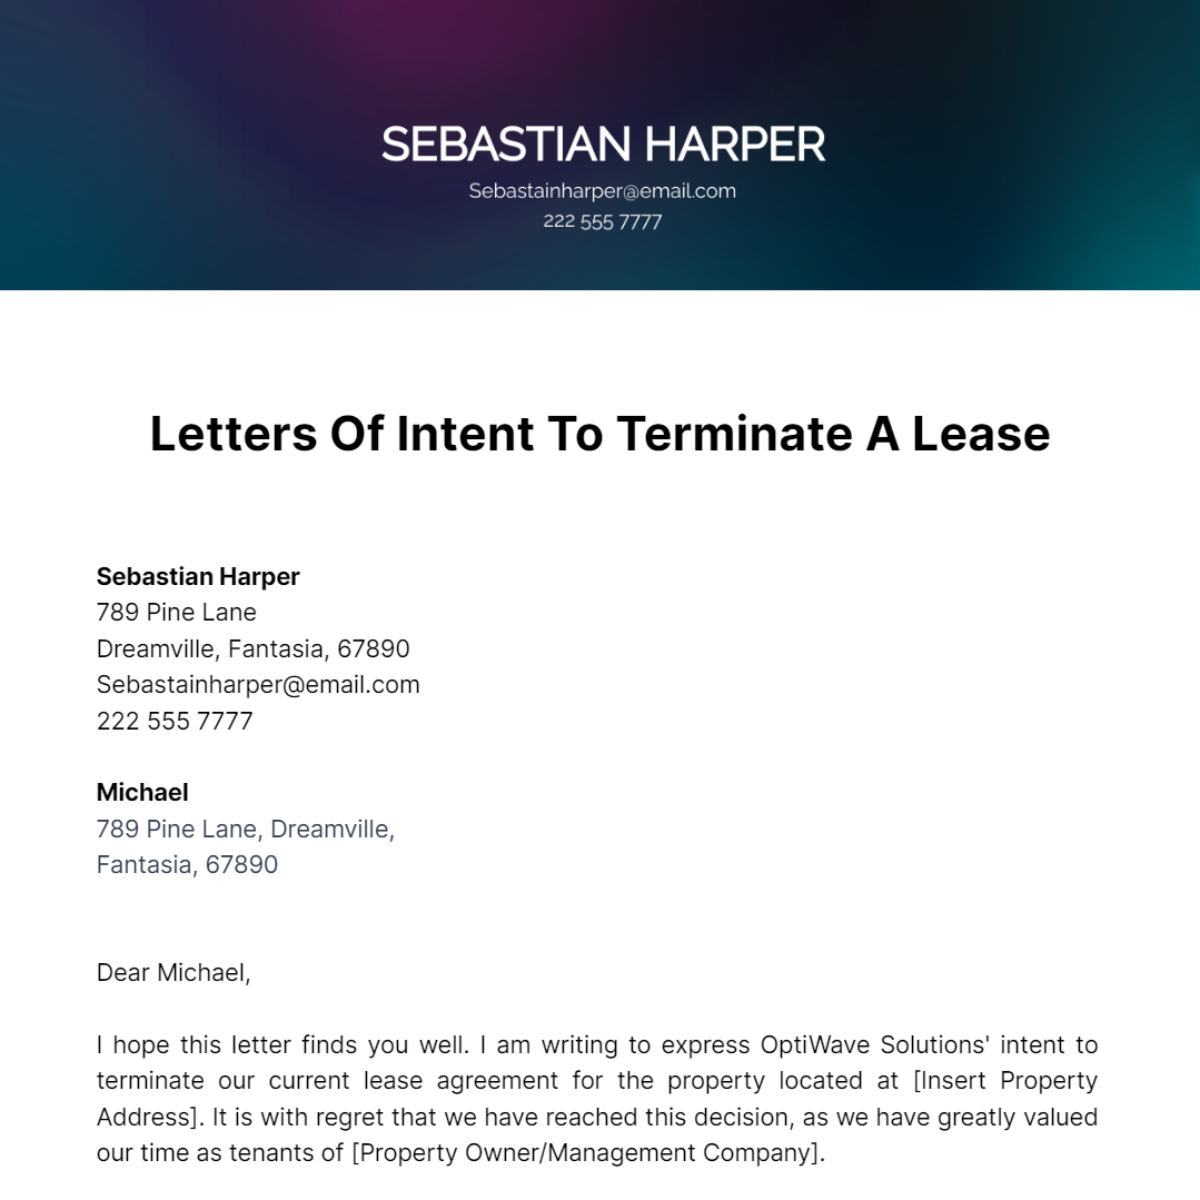 Letters Of Intent To Terminate A Lease Template